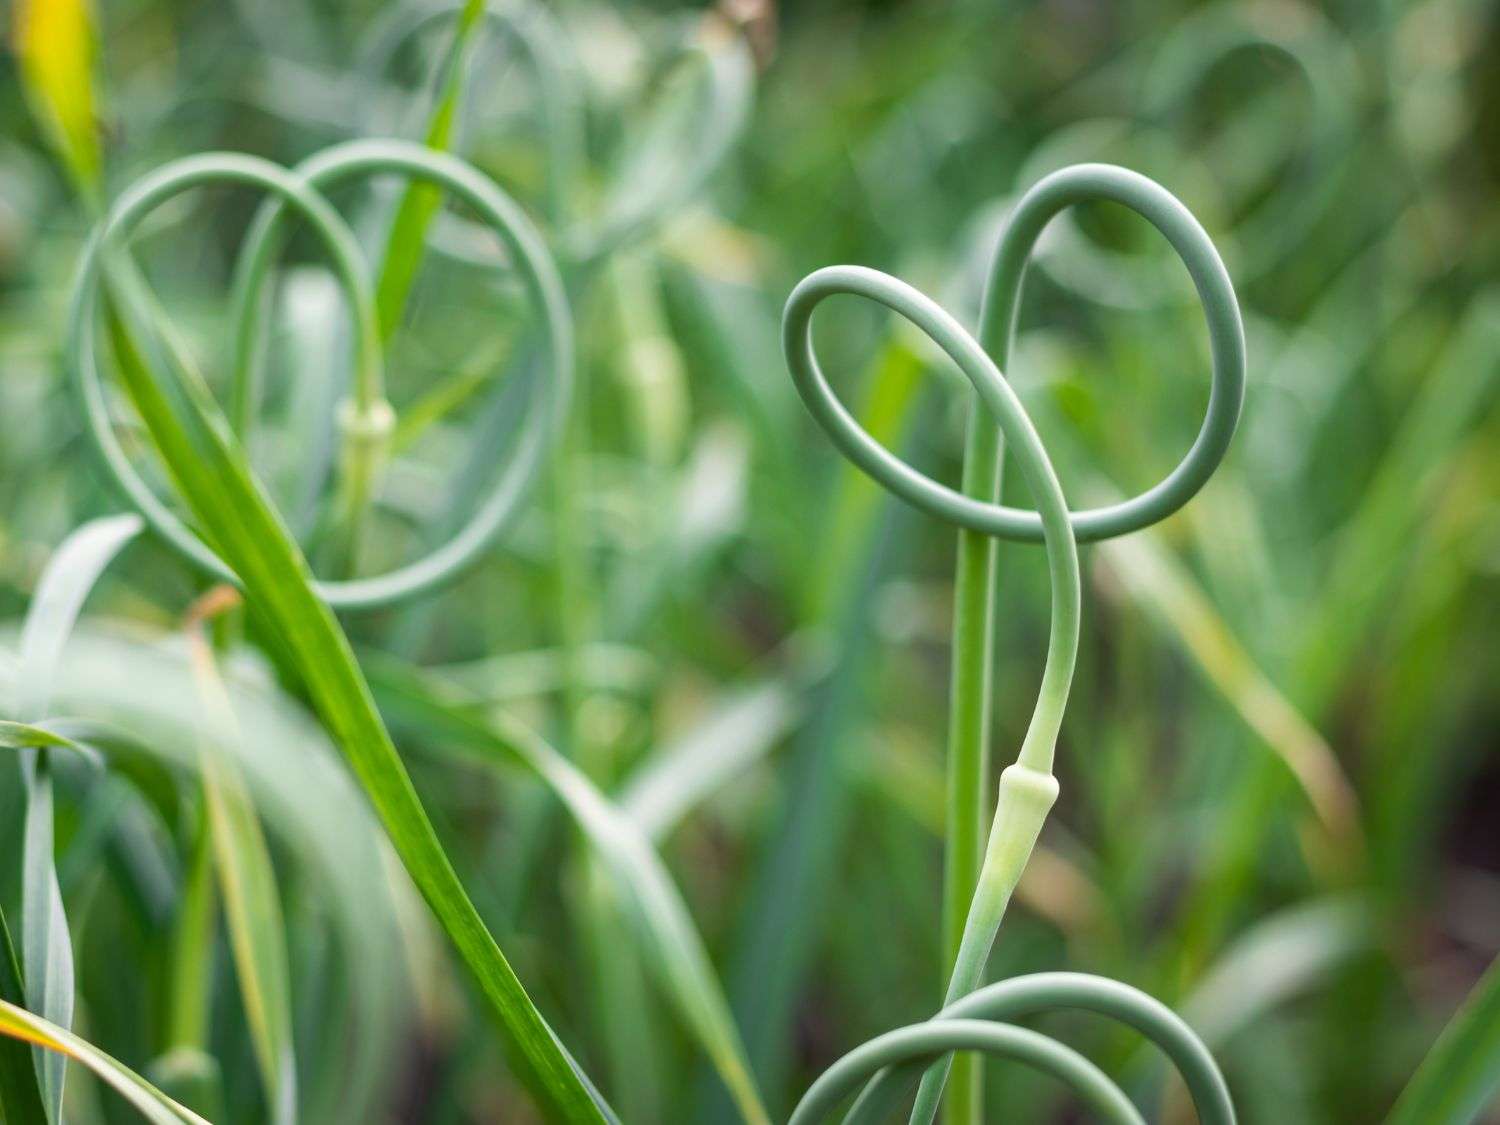 Garlic scapes with 2 curls